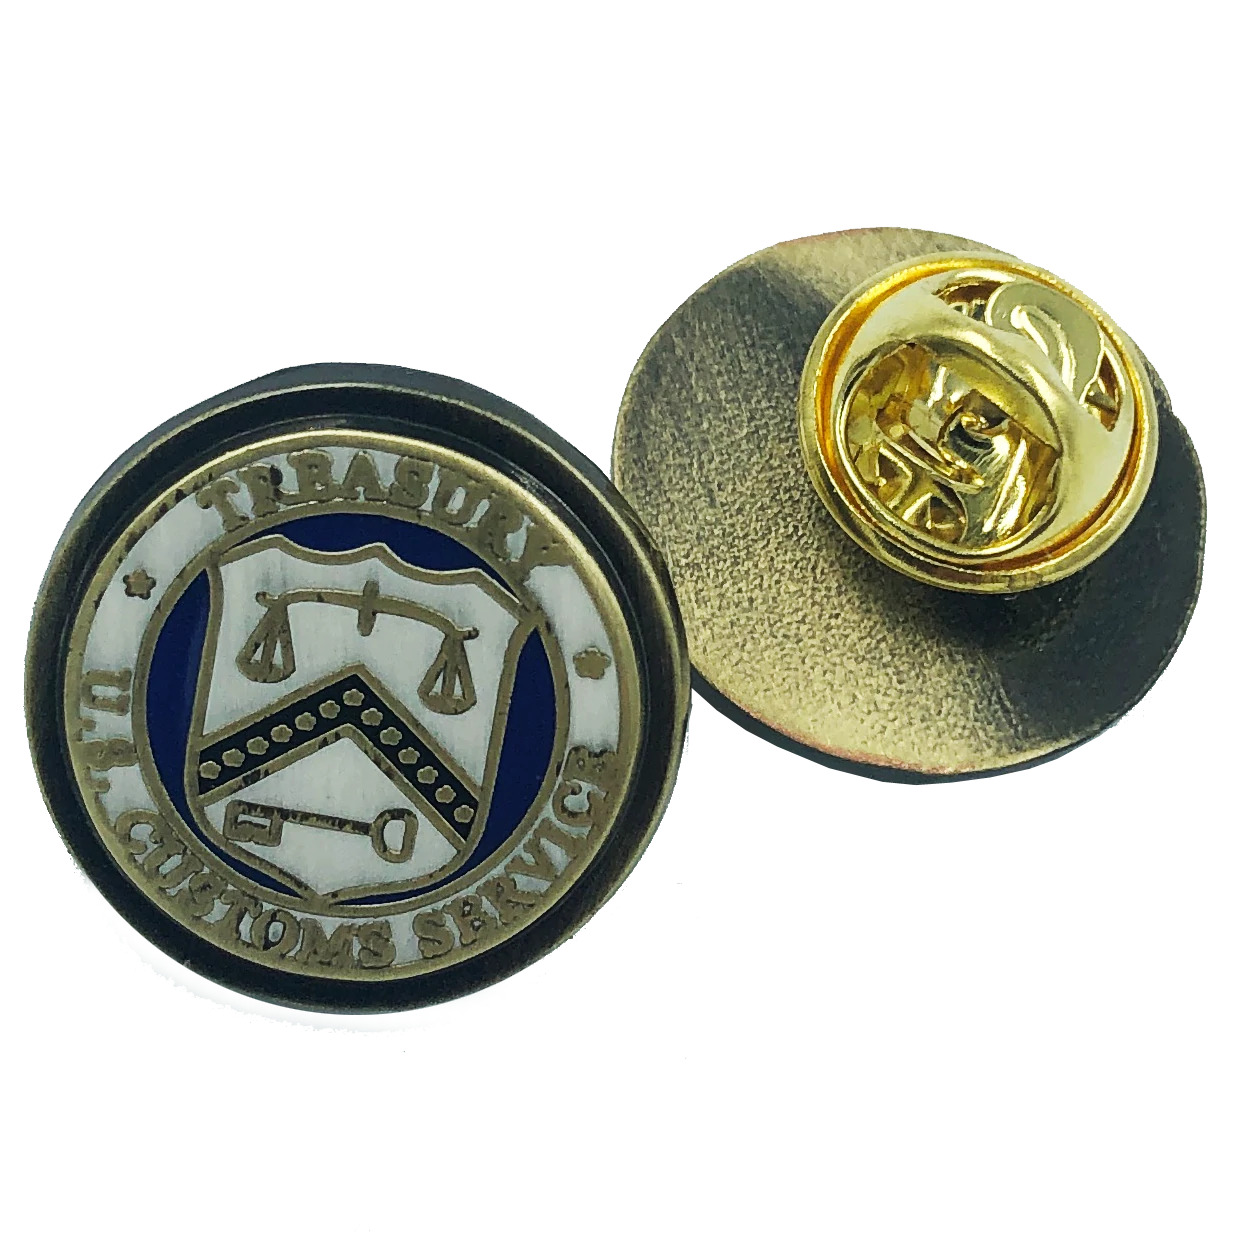 L-33 vintage style Legacy U.S. Customs lapel pin or tie tack USCS Special Agent